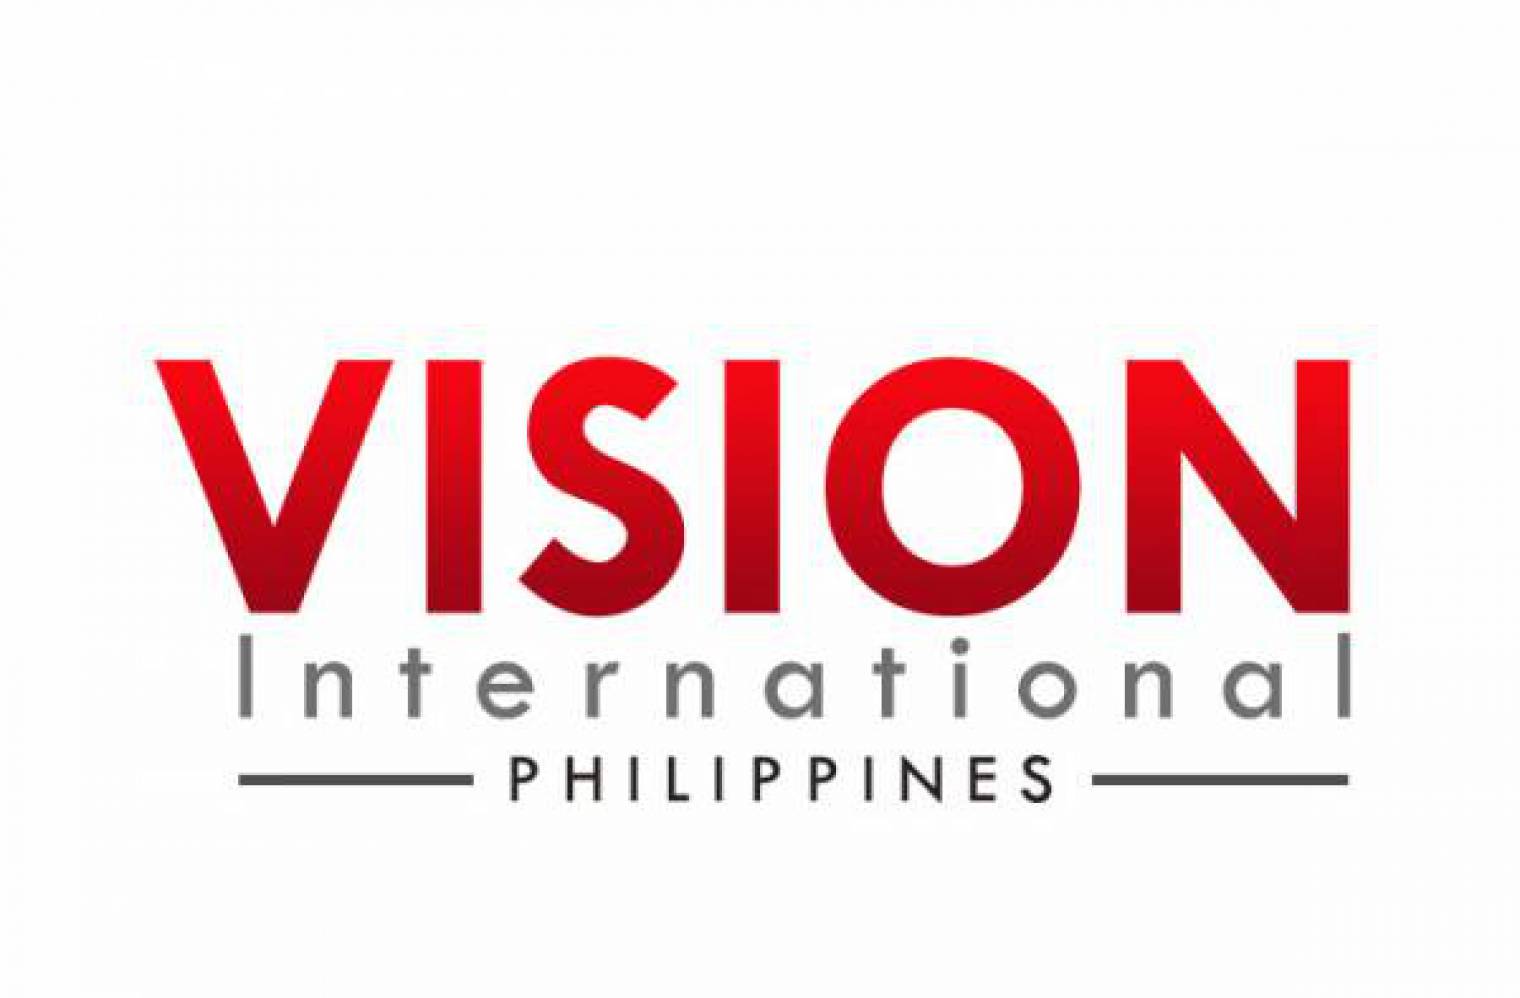 Welcome to our new Affiliate Member Vision International Philippines